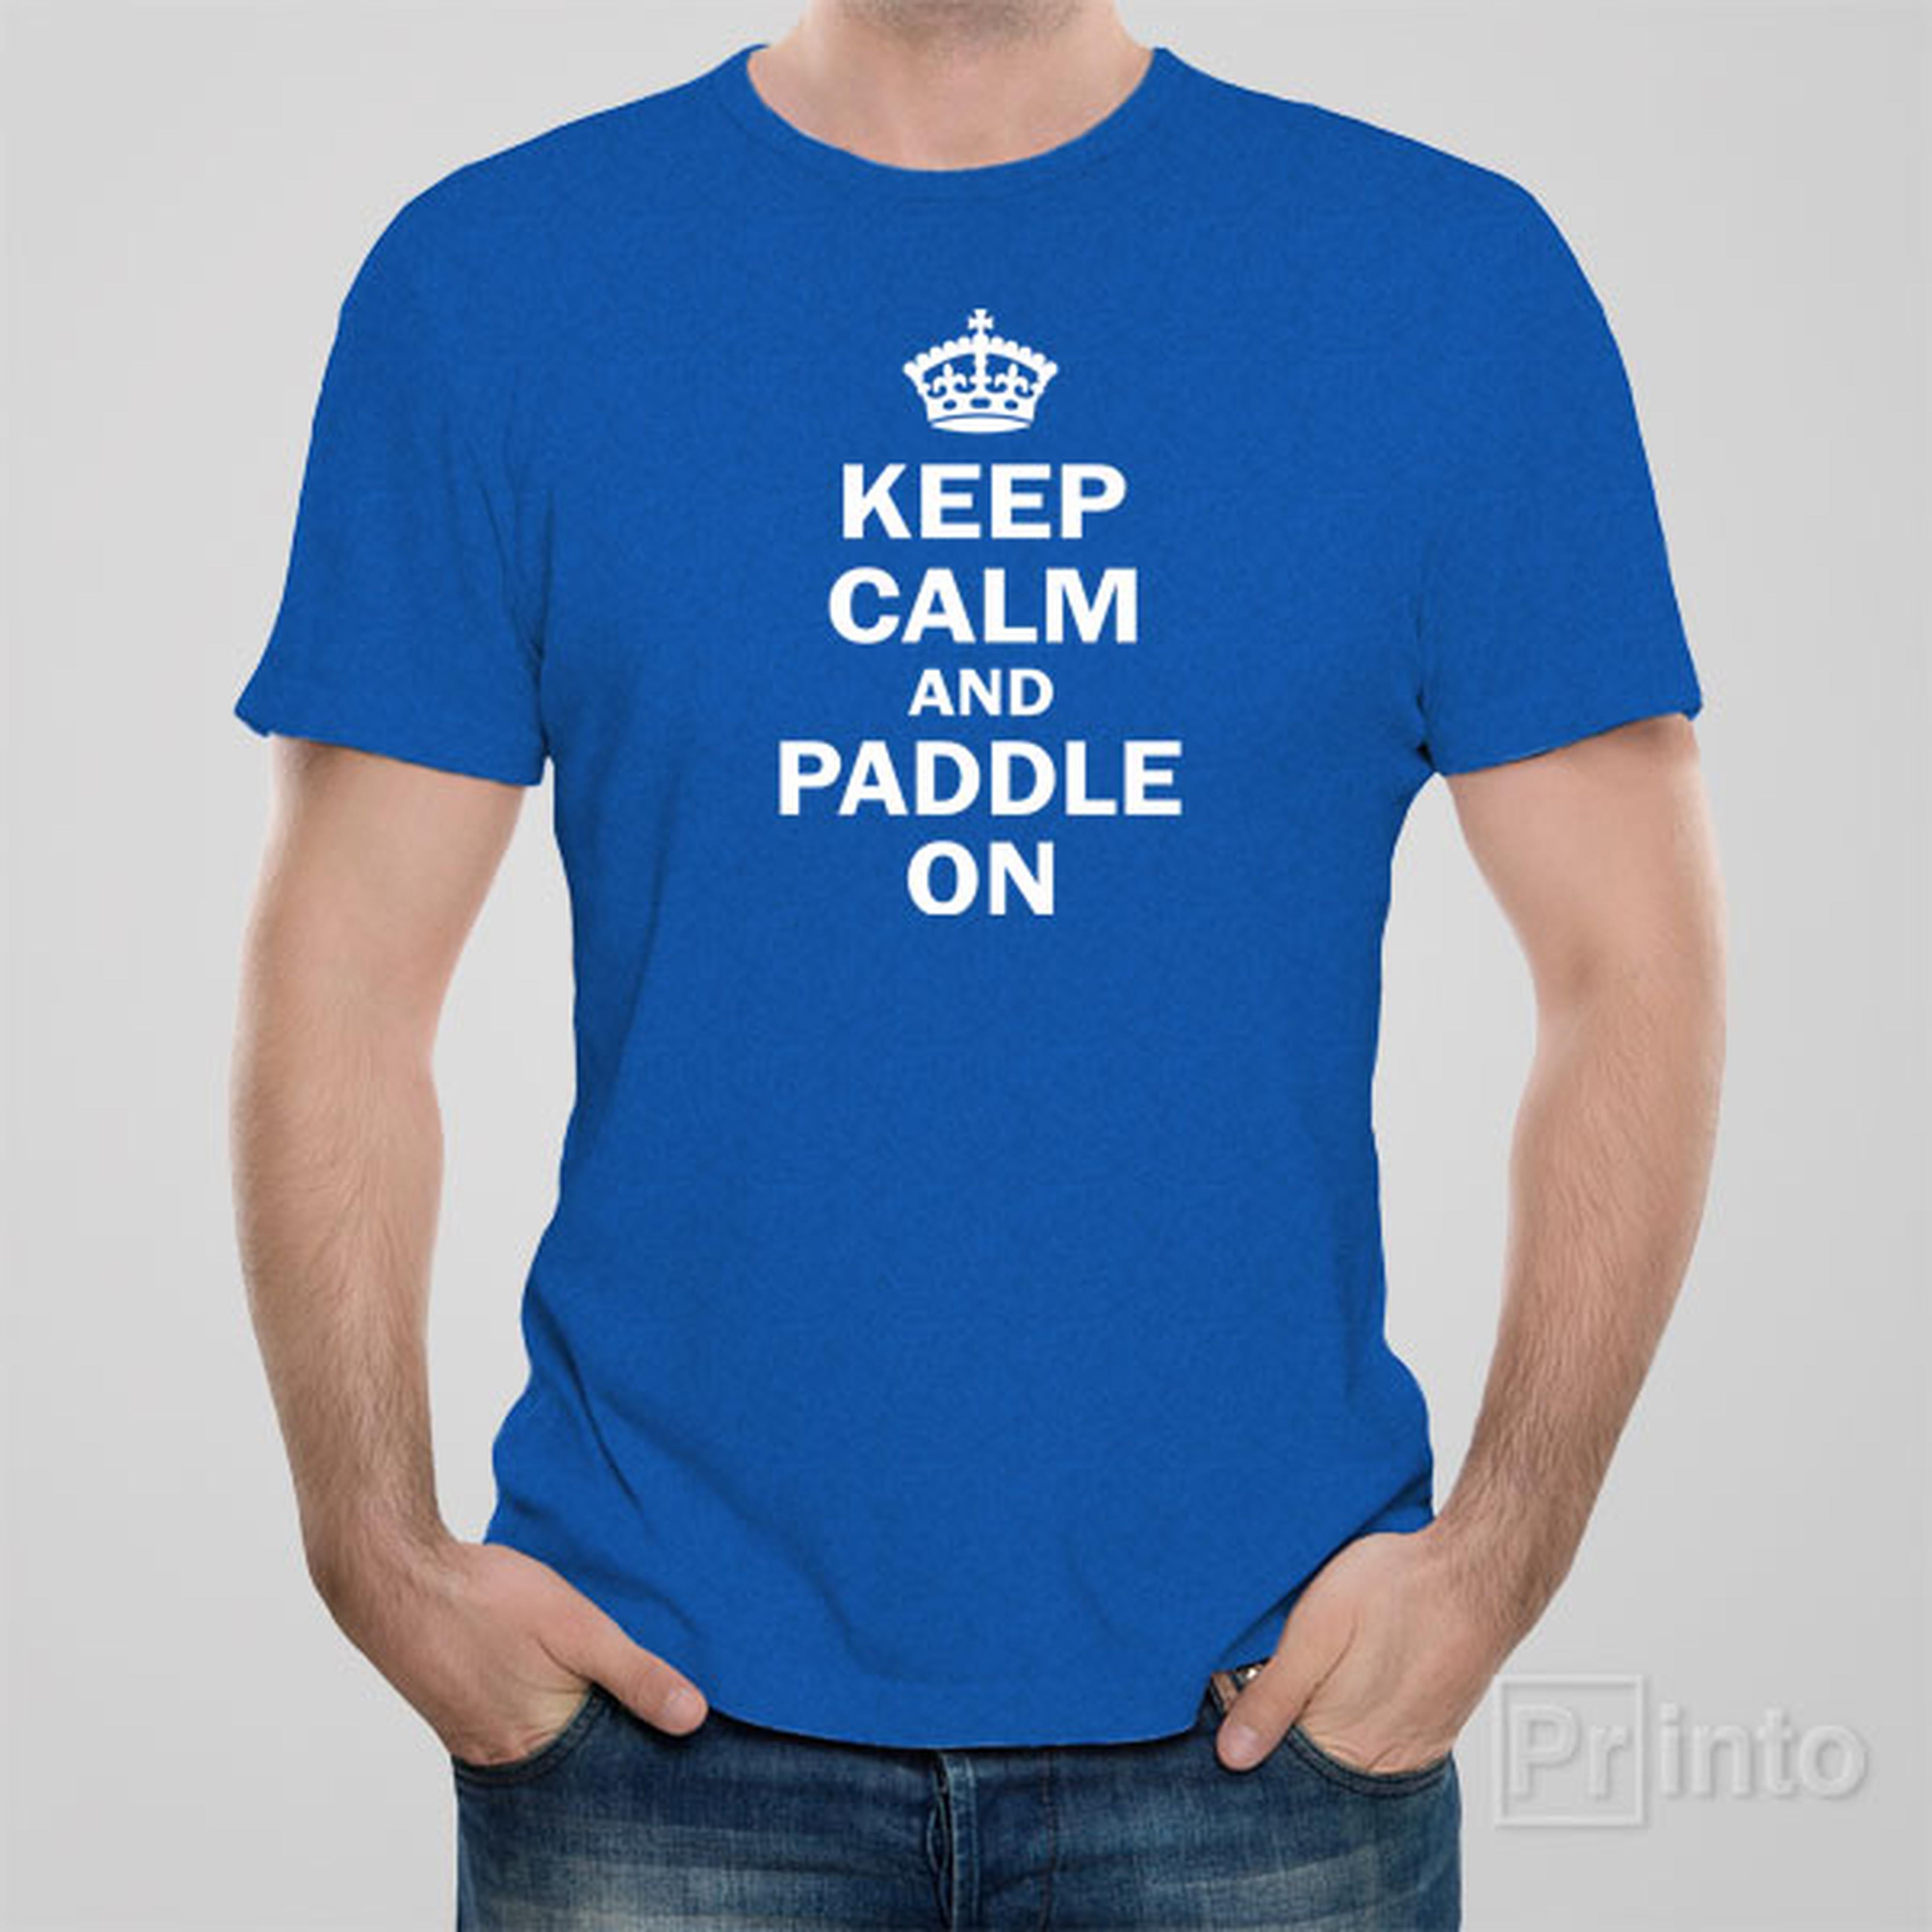 keep-calm-and-paddle-on-t-shirt